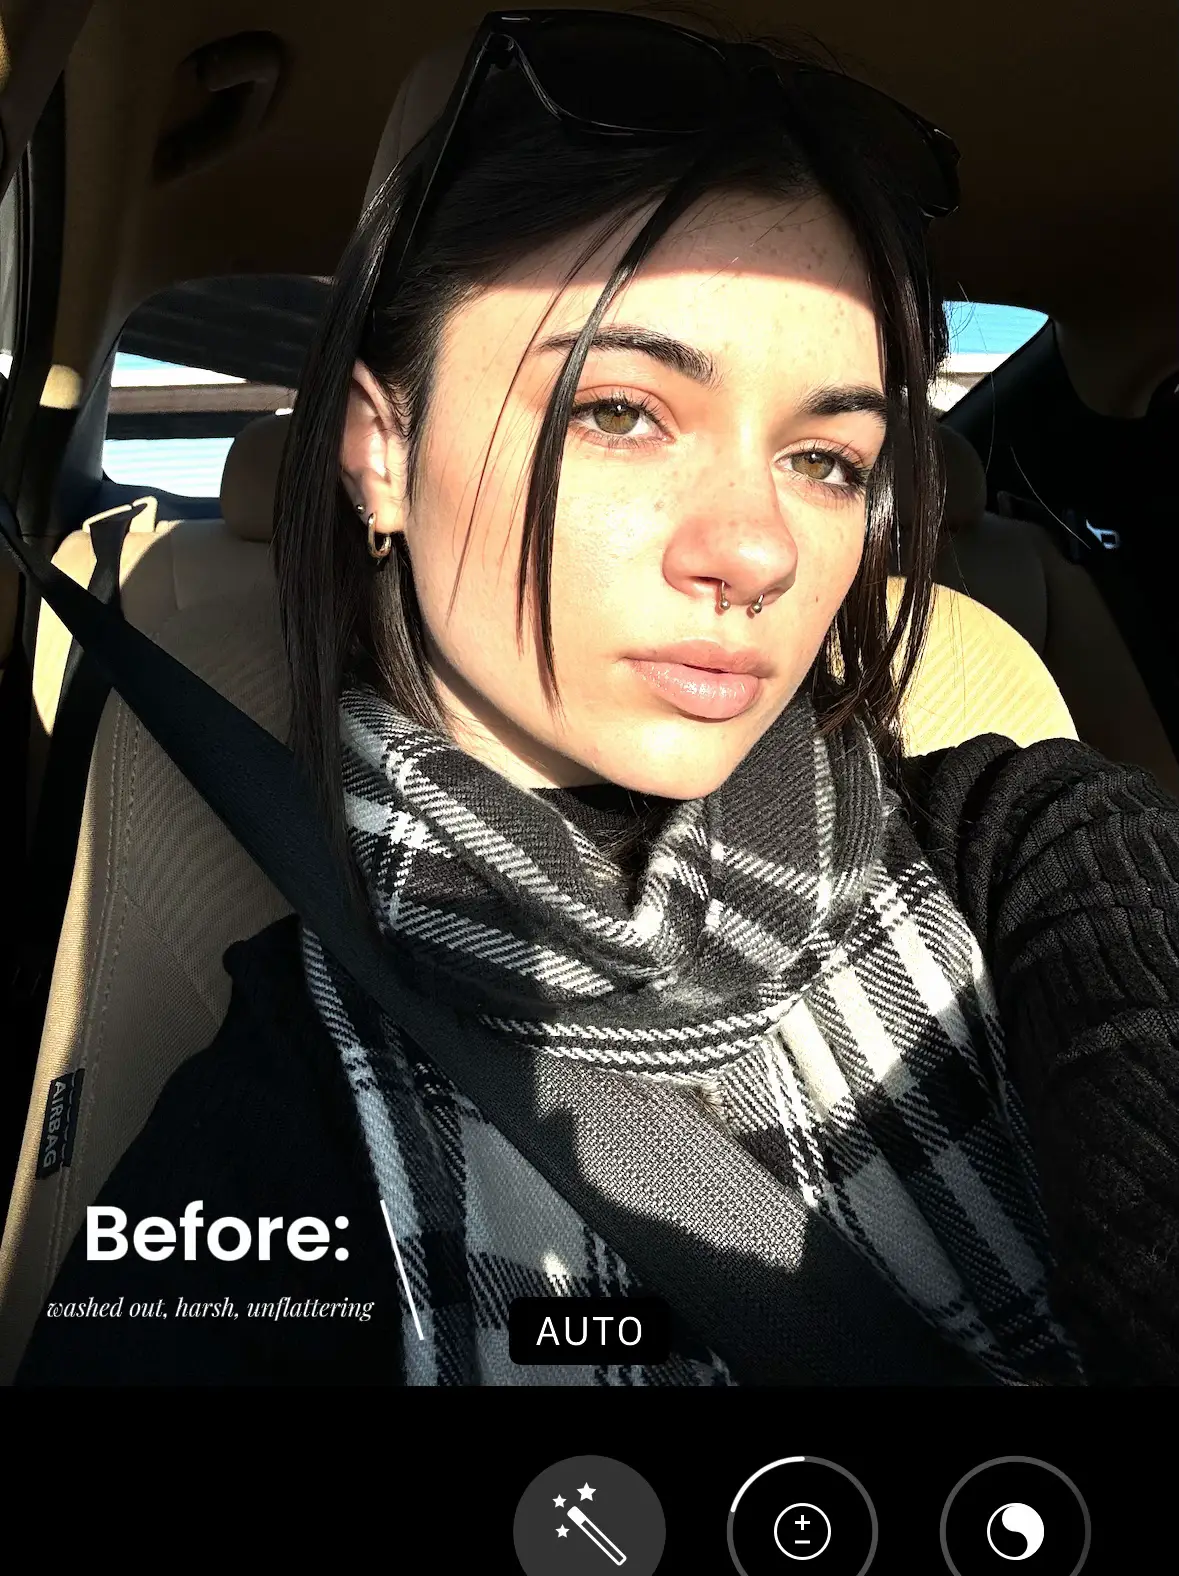  A woman wearing a black sweater and a scarf is sitting in a car.